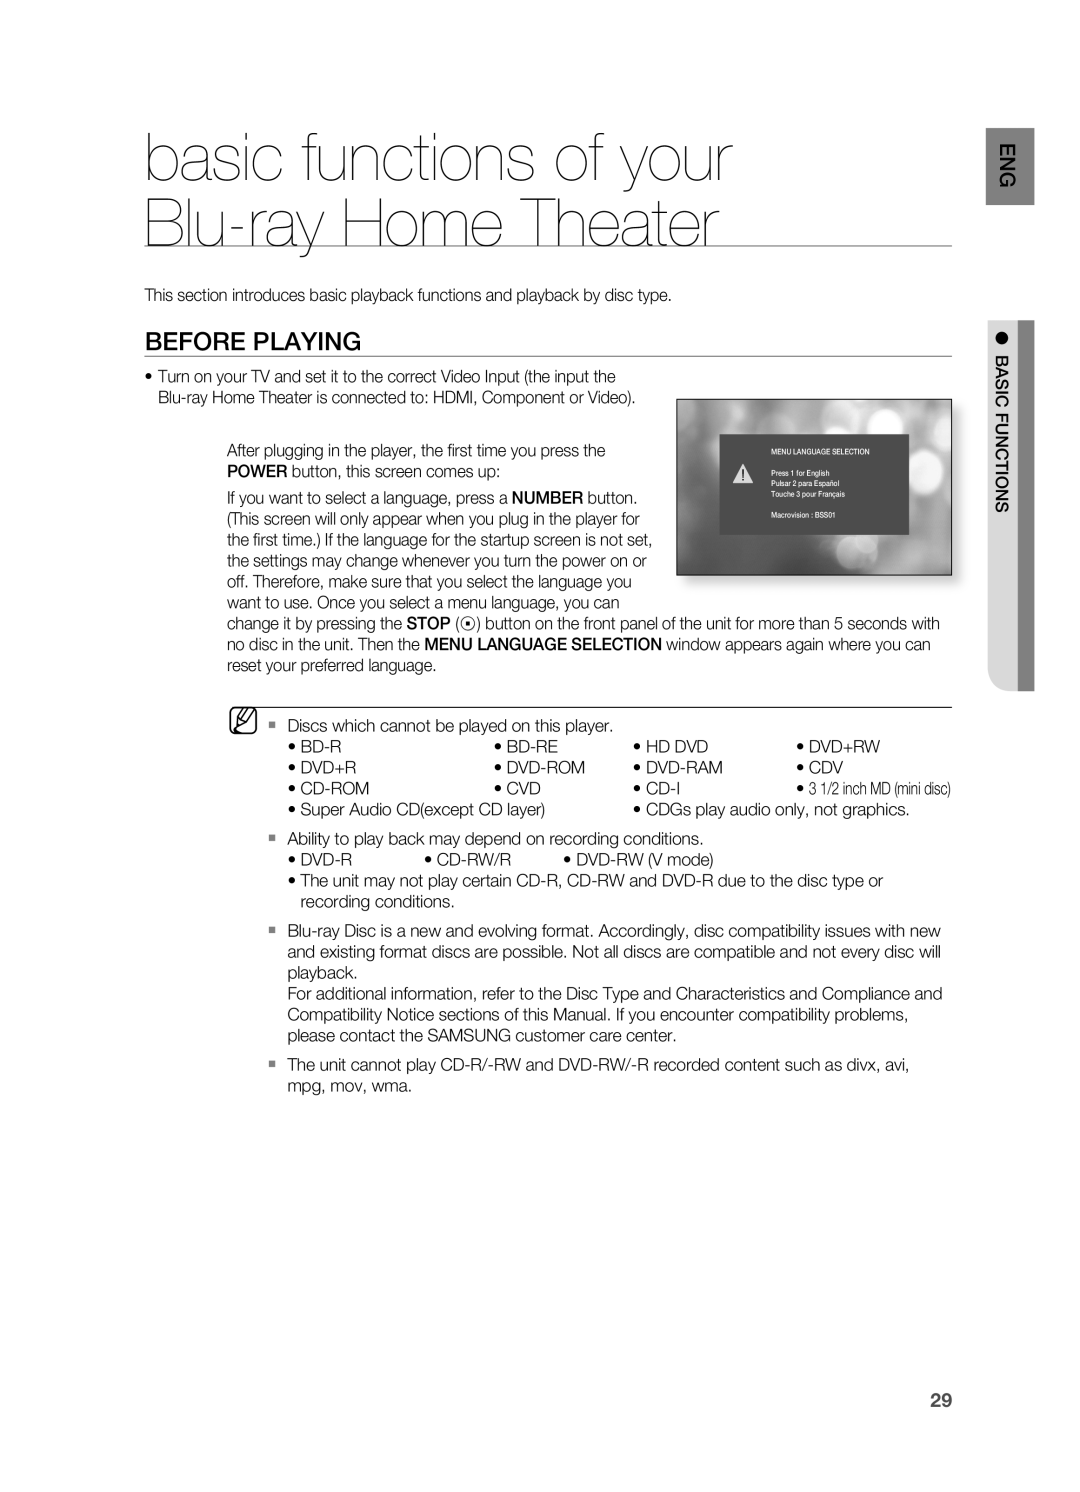 Samsung HT-BD2S manual basic functions of your Blu-rayHome Theater, BEFORE PLAYIng 